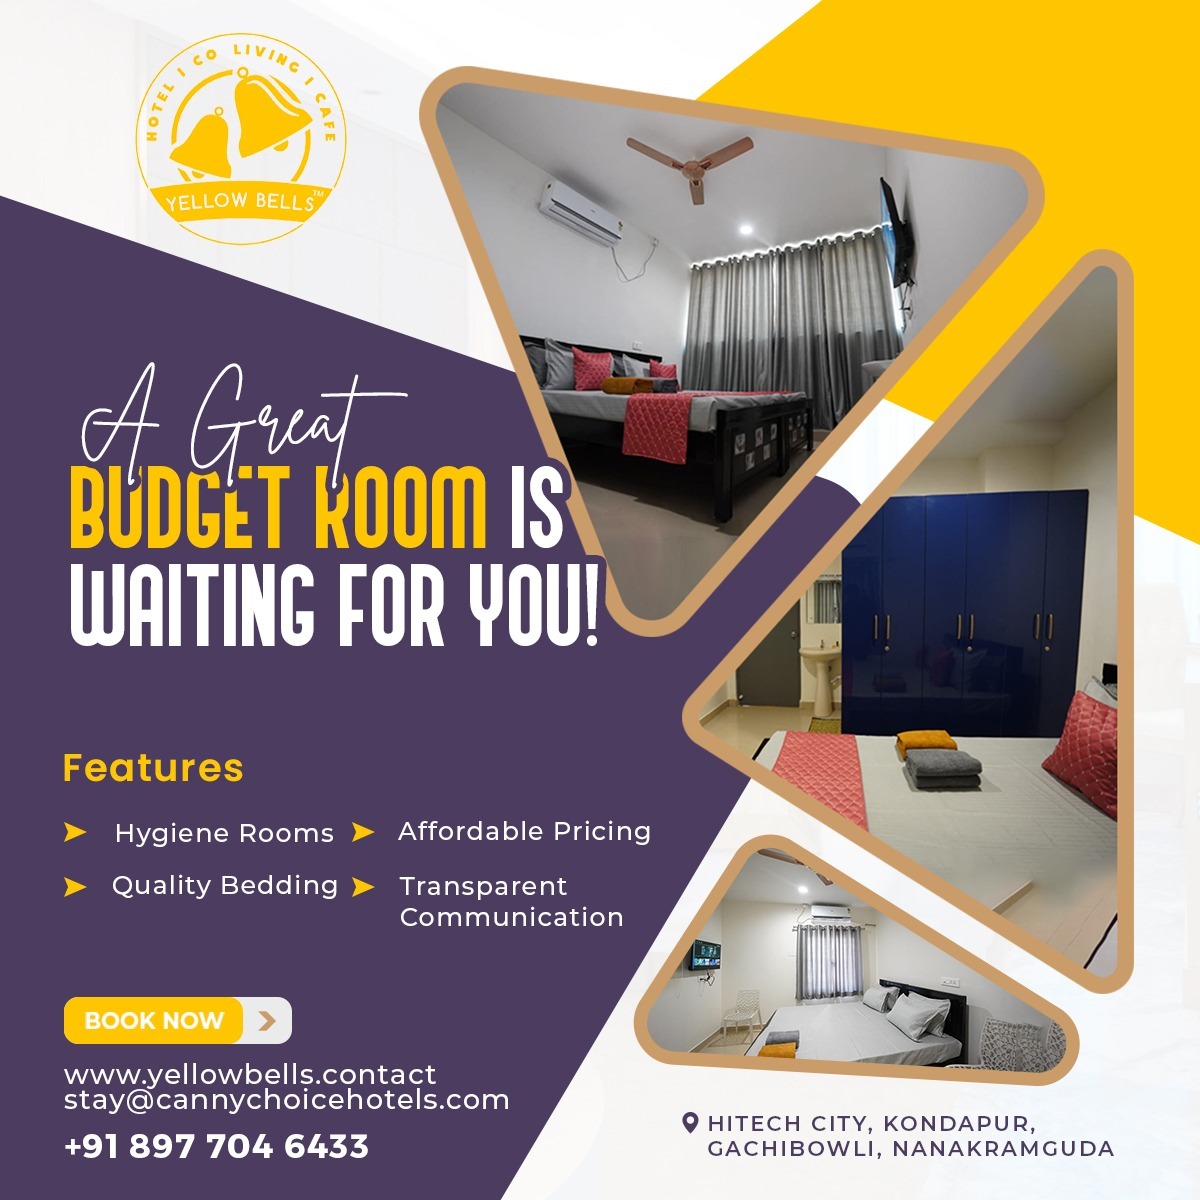 Book your Budget Living experience today! with Yellow Bells.

Call us at: +91 89770 46433
Book Now: yellowbells.contact/index.html

#YellowBellsHotels
#BudgetHotelsInHyderabad #HomestayInHyderabad #HotelsInMadhapur #HotelsInMiyapur